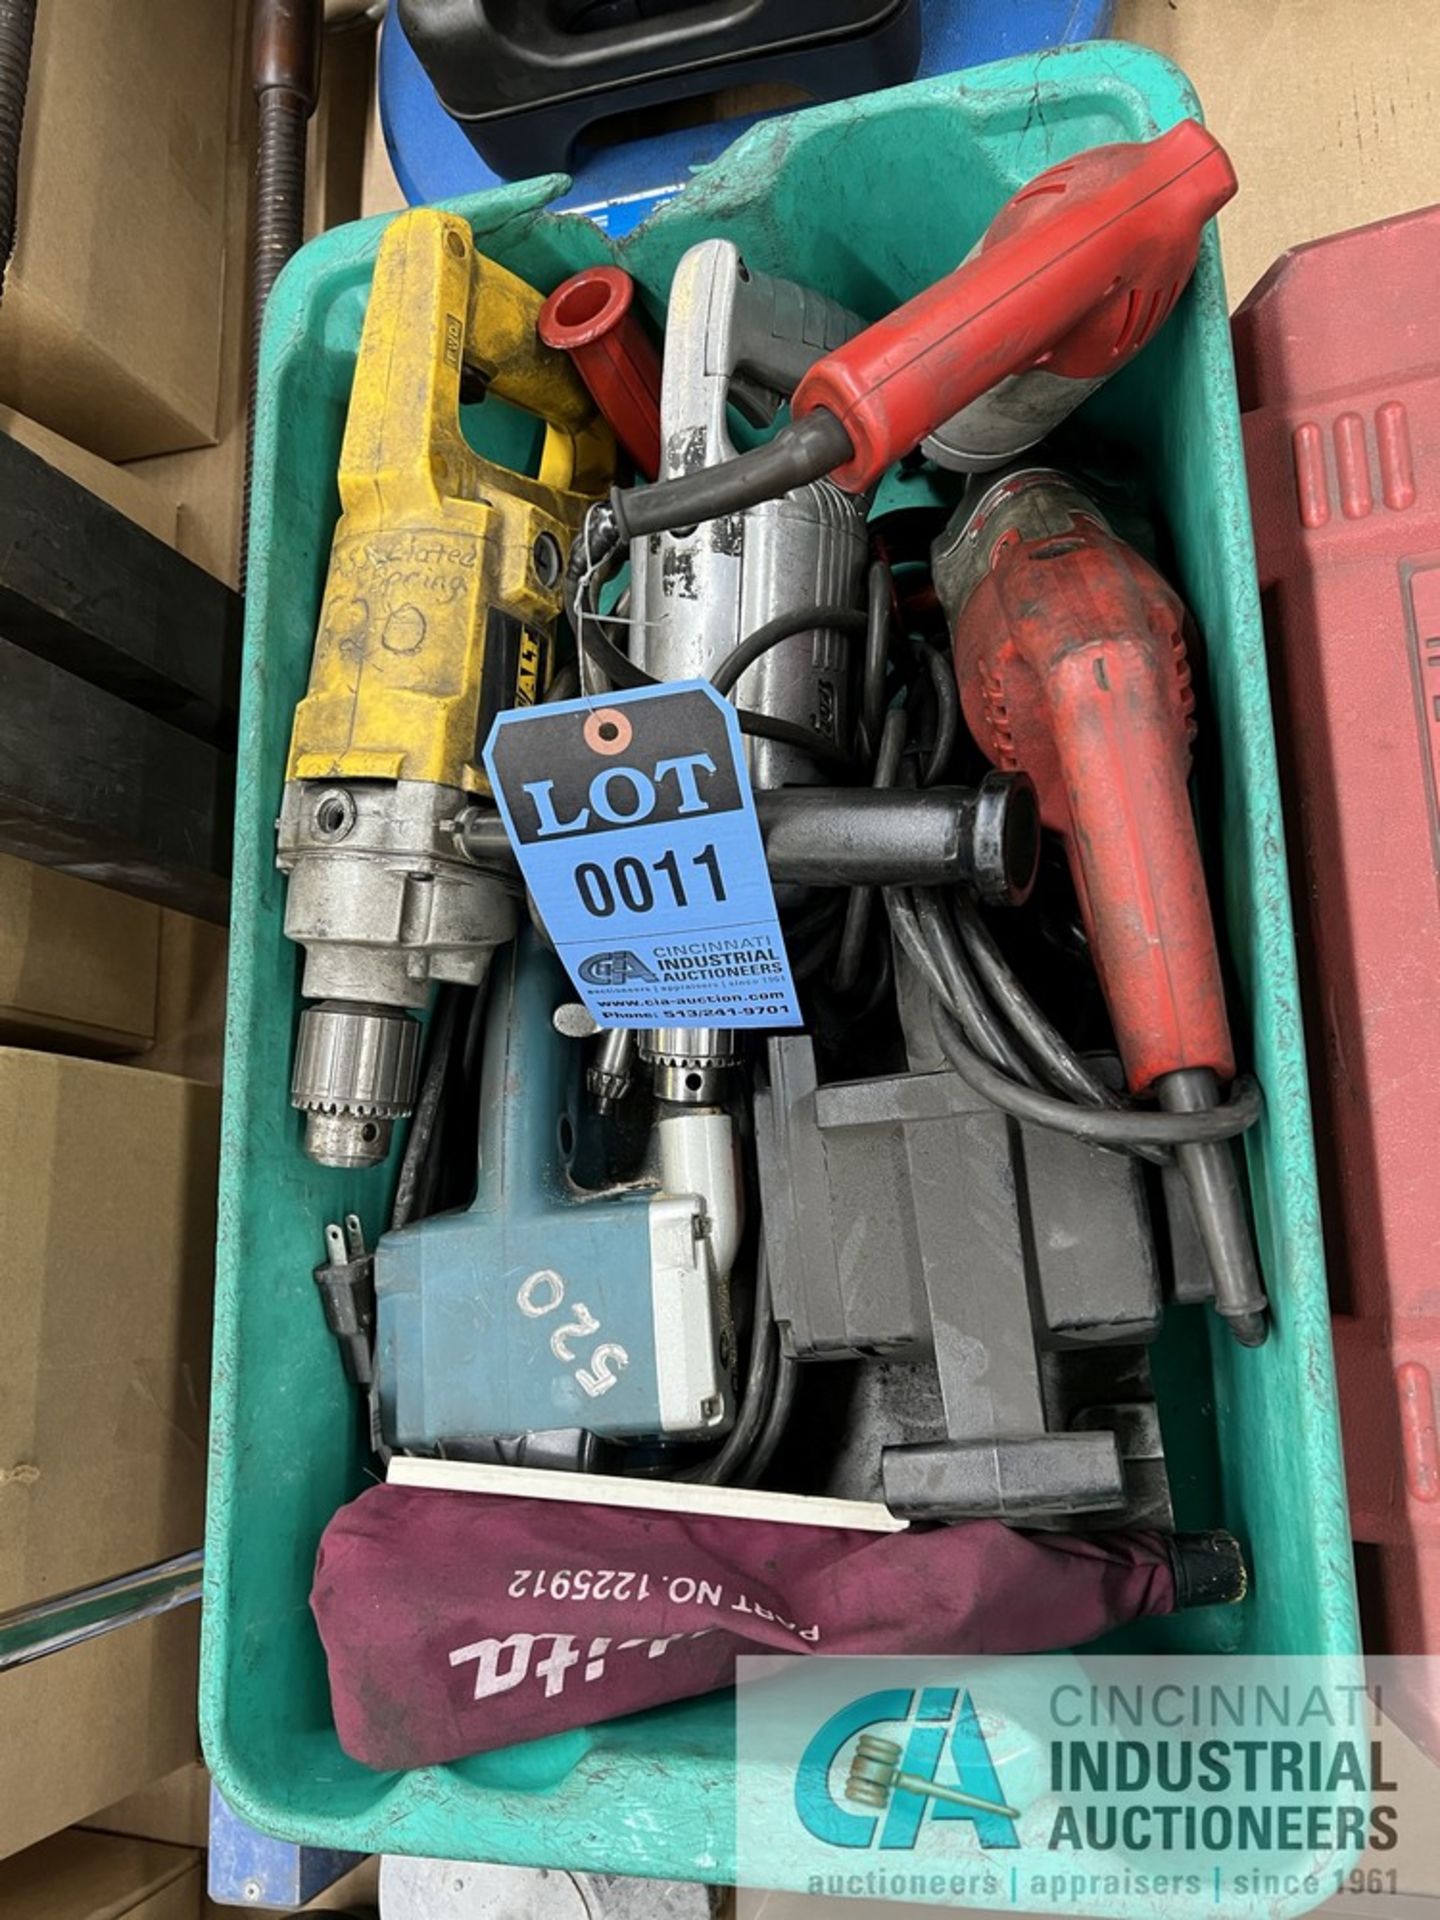 (LOT) ASSORTMENT OF ELECTRIC POWER TOOLS, SANDERS, DRILLS; MILWAUKEE, THOR, AND DEWALT BRANDS